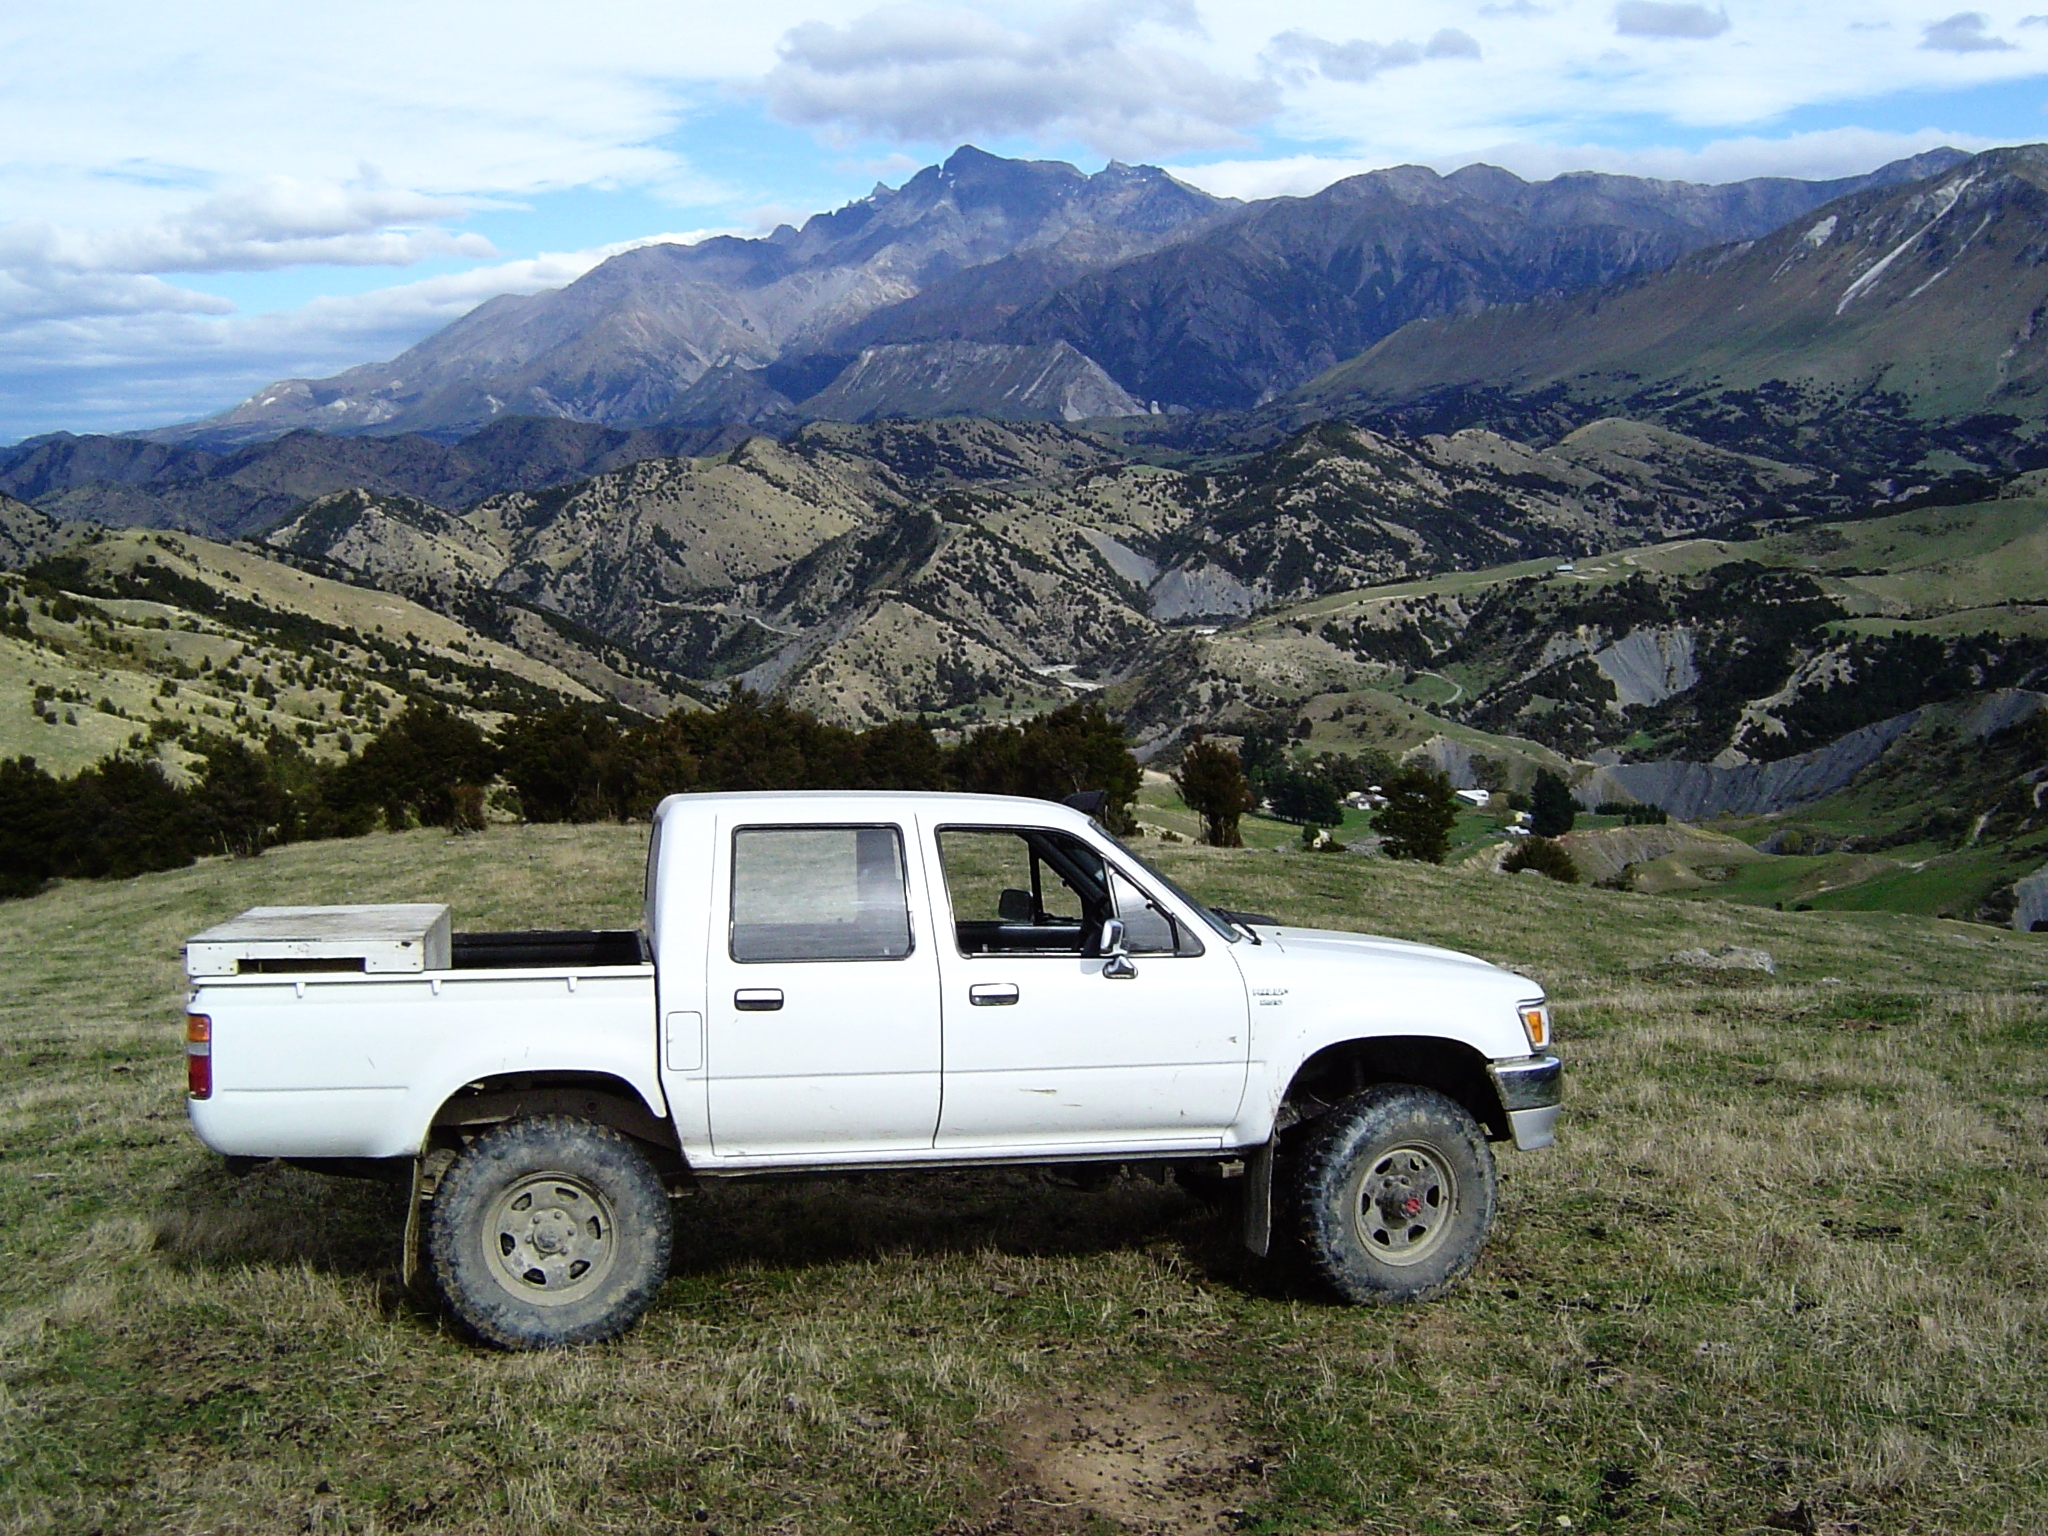  The authors 1998 LN106 Toyota Hilux 